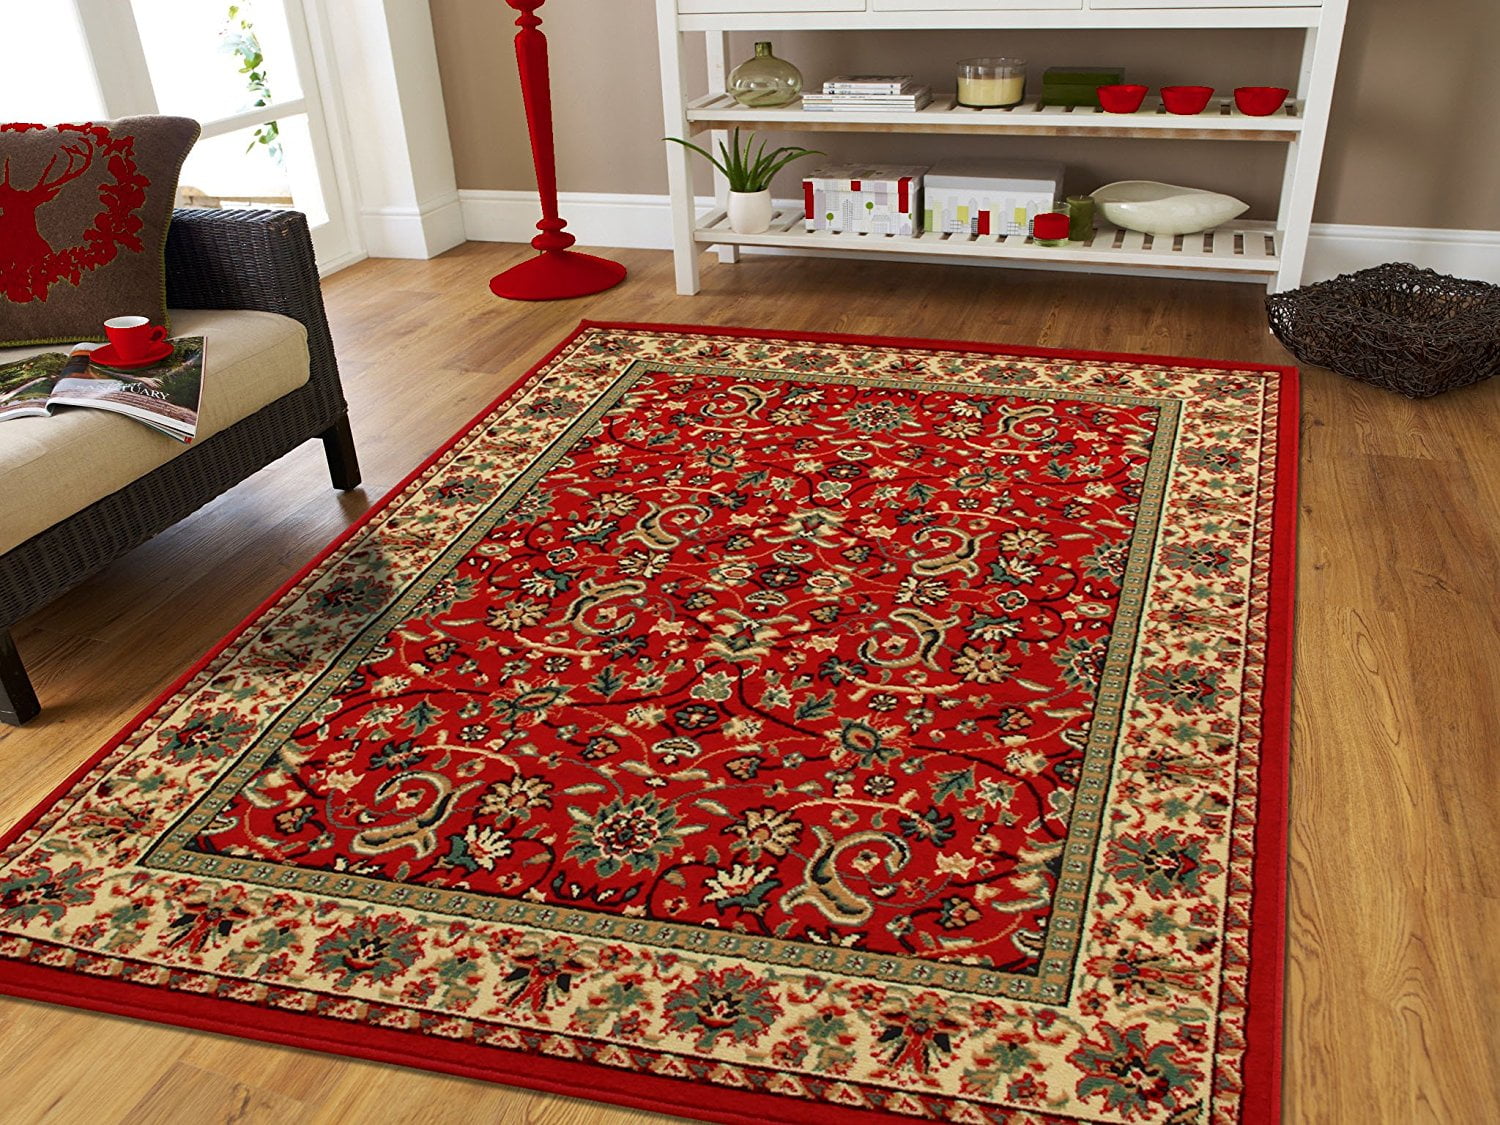 Red Persian Area Rugs For Living Room, Red Persian Rug